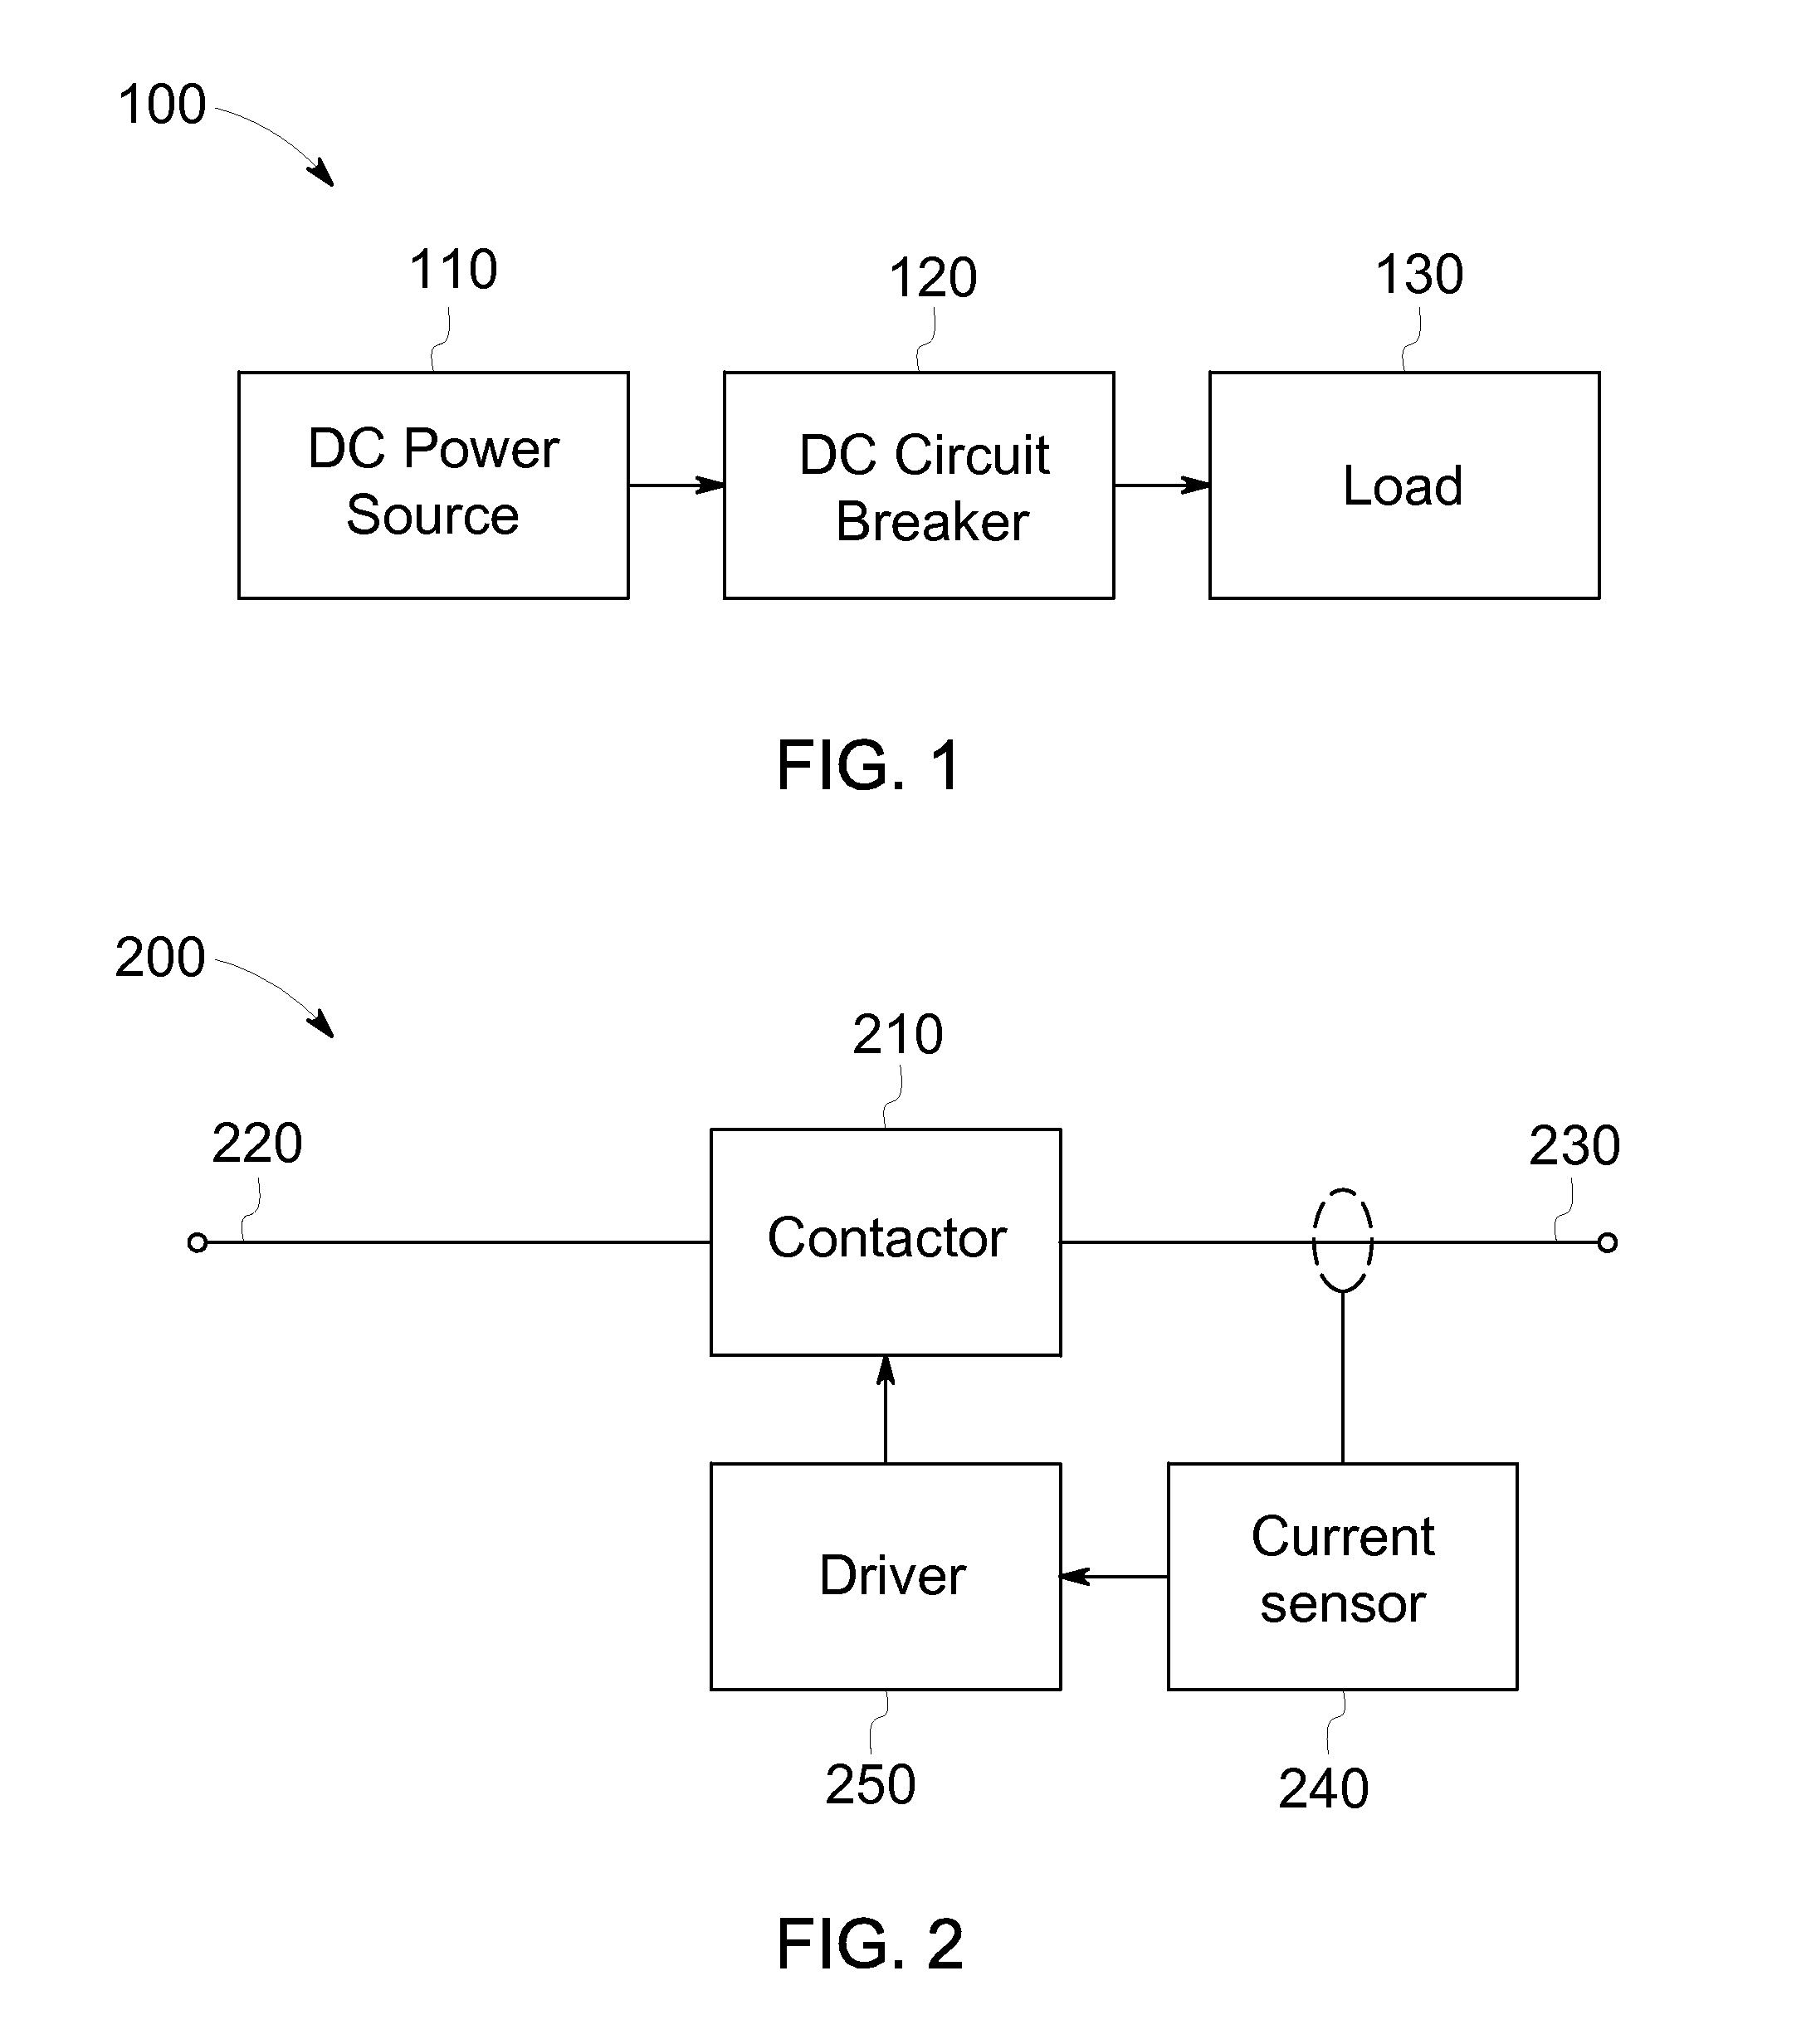 DC circuit breaker and method of use